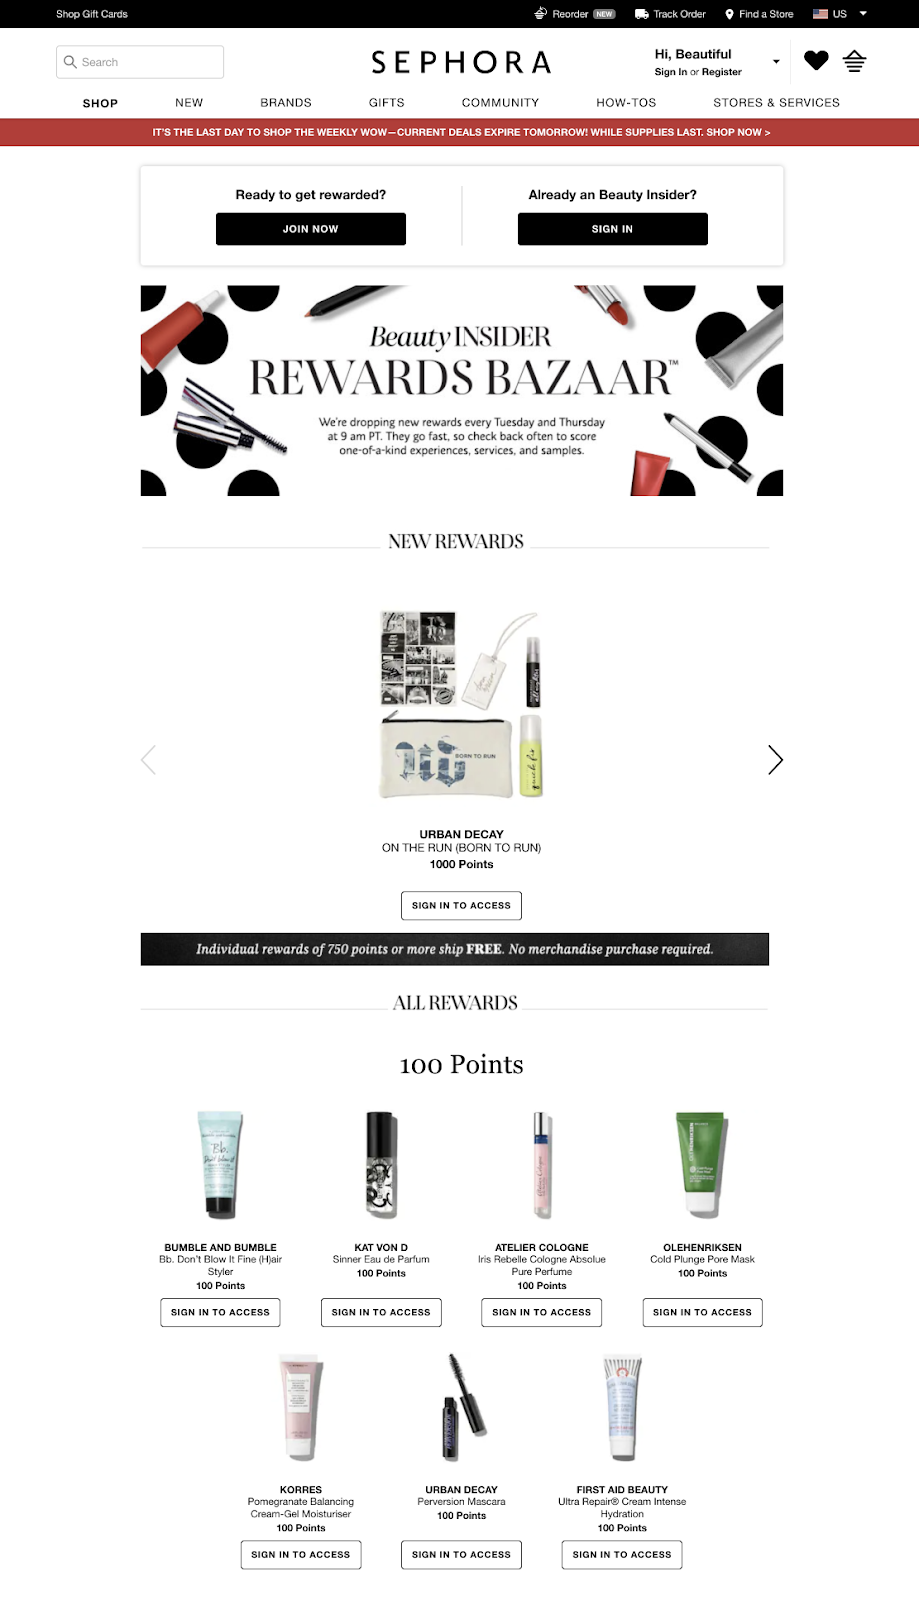 Screenshot showing a page on Sephora